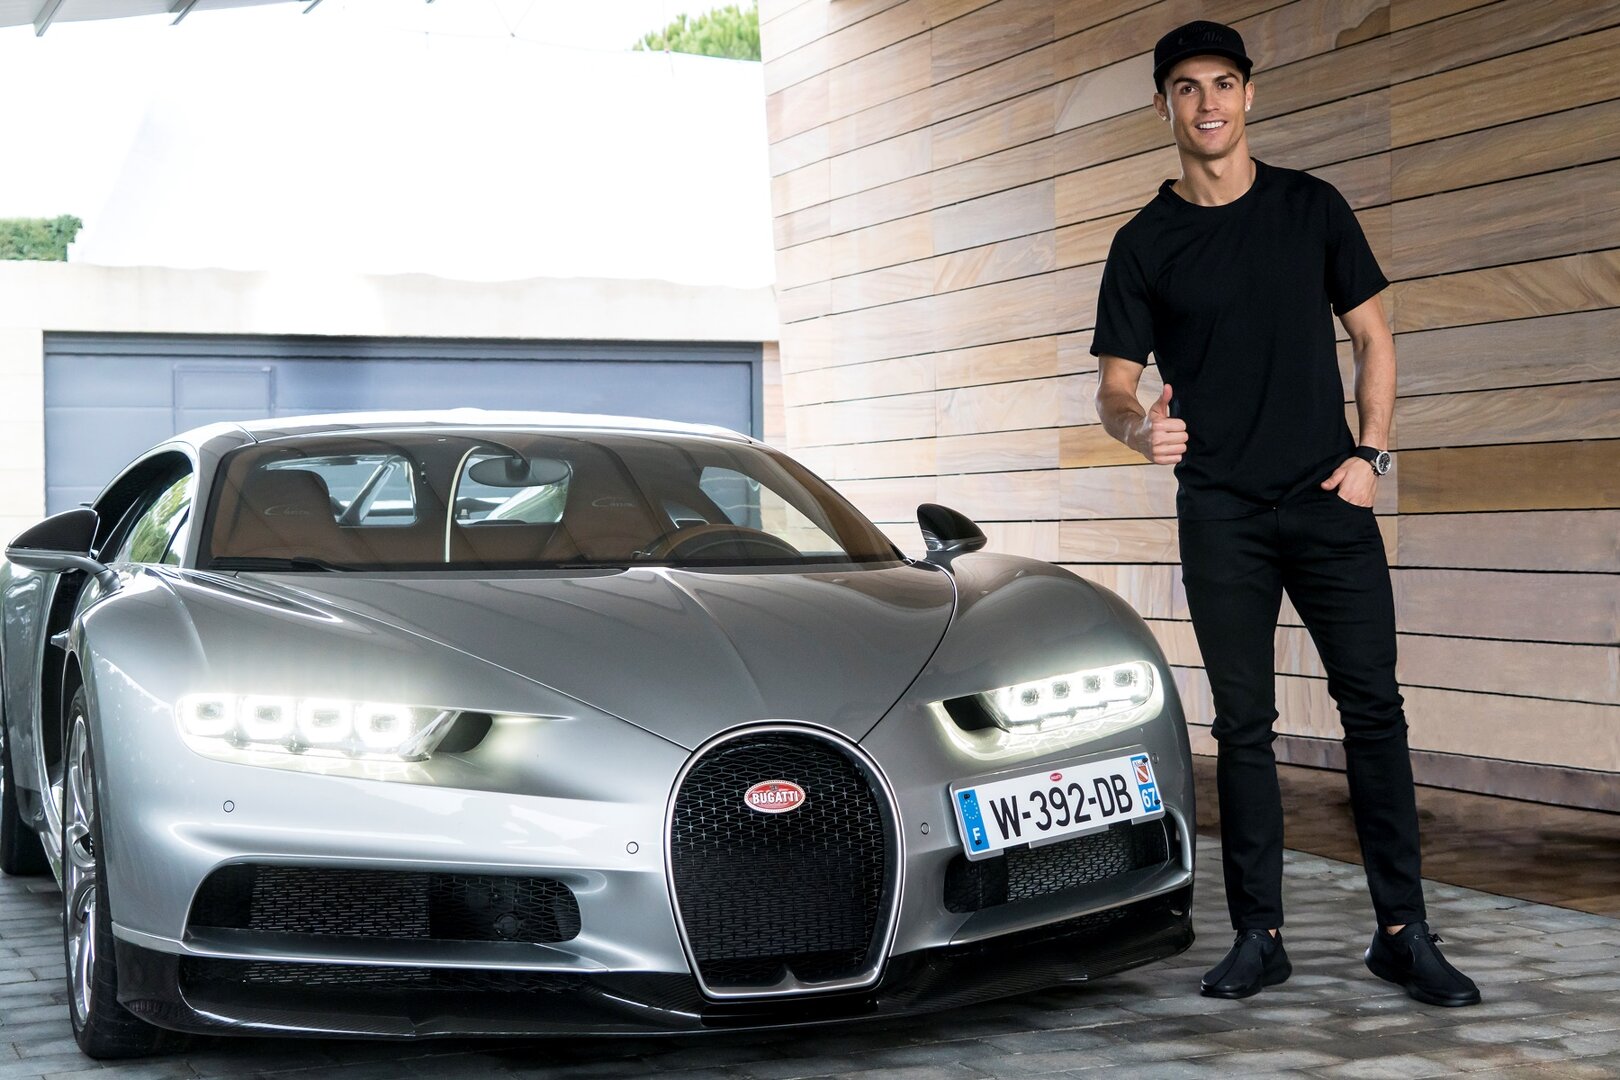 Top 10 most expensive cars owned by football players